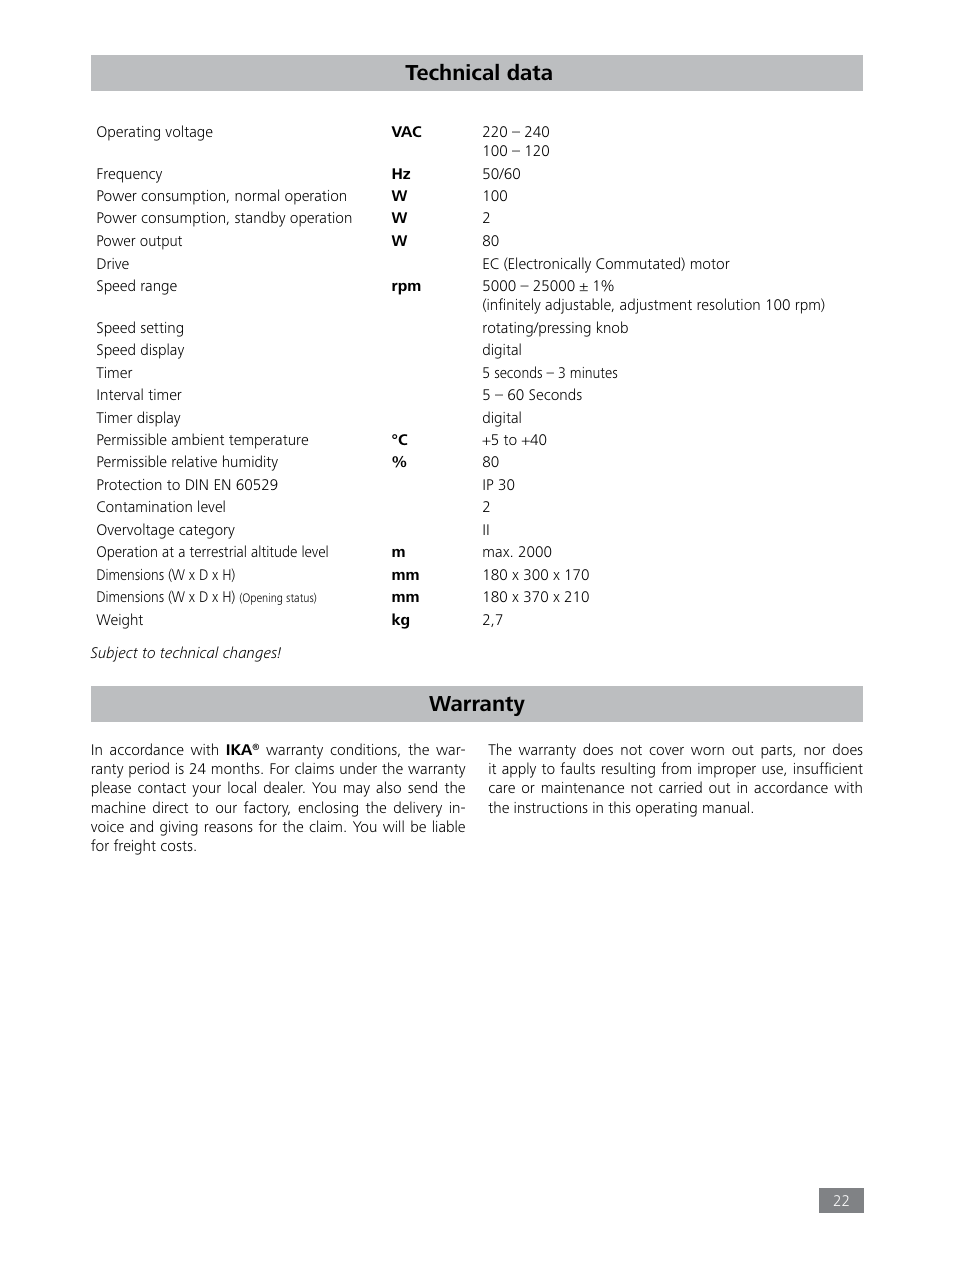 Technical data warranty | IKA Tube Mill control User Manual | Page 22 / 64